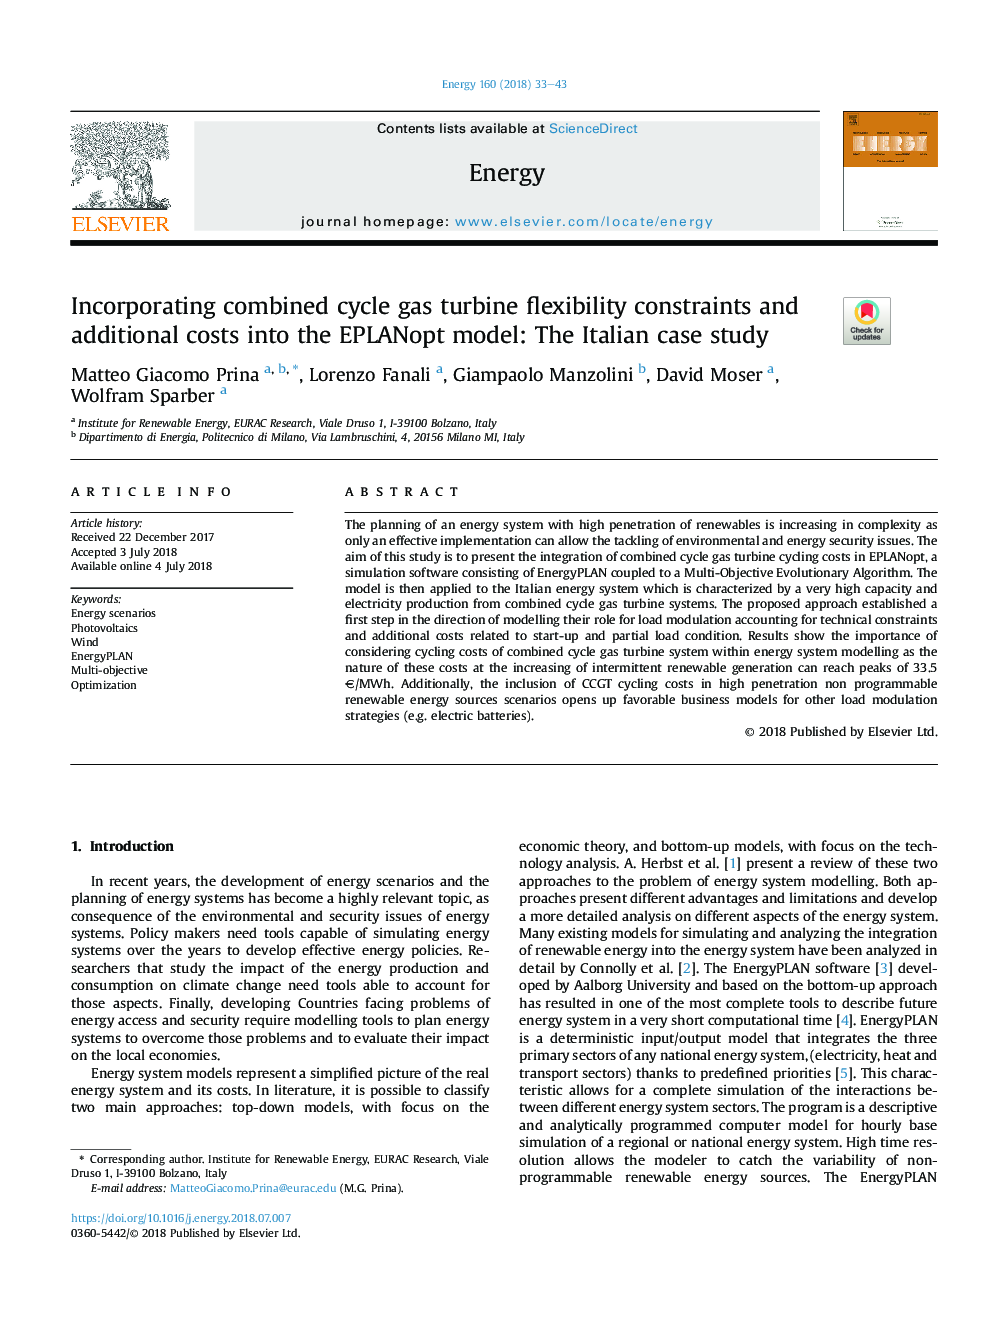 Incorporating combined cycle gas turbine flexibility constraints and additional costs into the EPLANopt model: The Italian case study